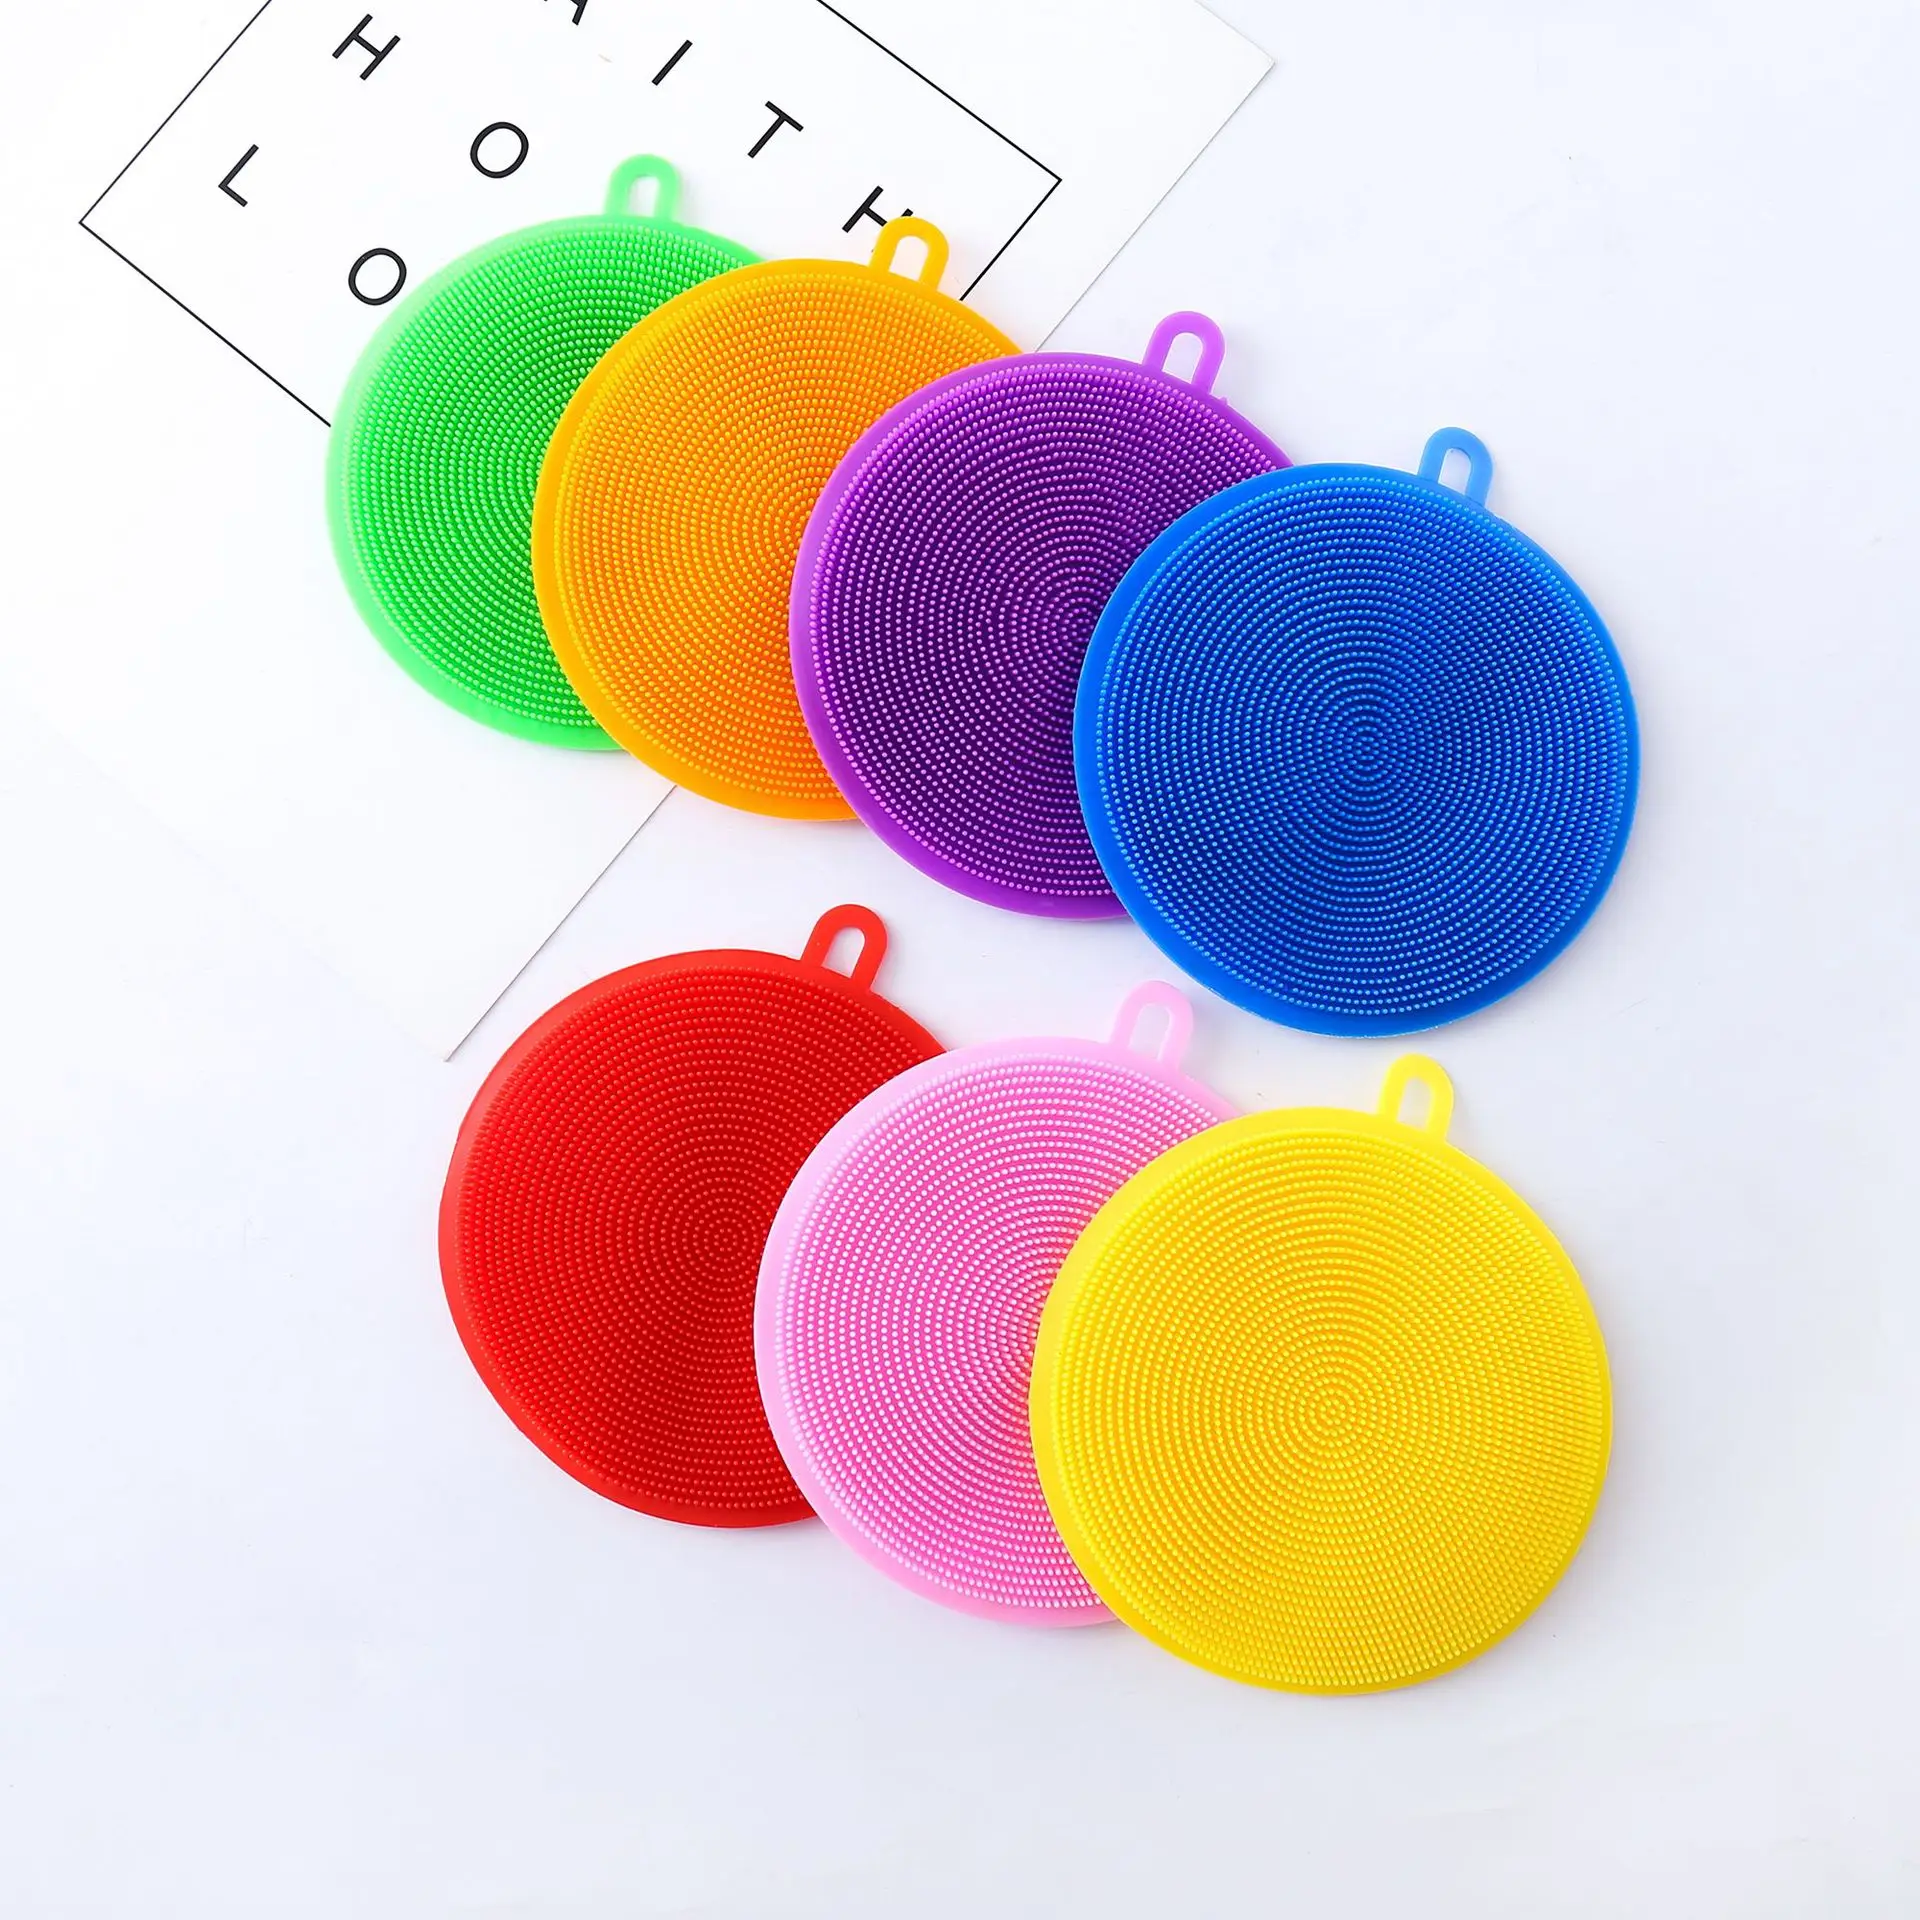 

Magic Cleaning Brushes Silicone Dish Bowl Scouring Pads Pot Pan Easy to Clean Wash Brushes Cleaner Sponges Dish Rags